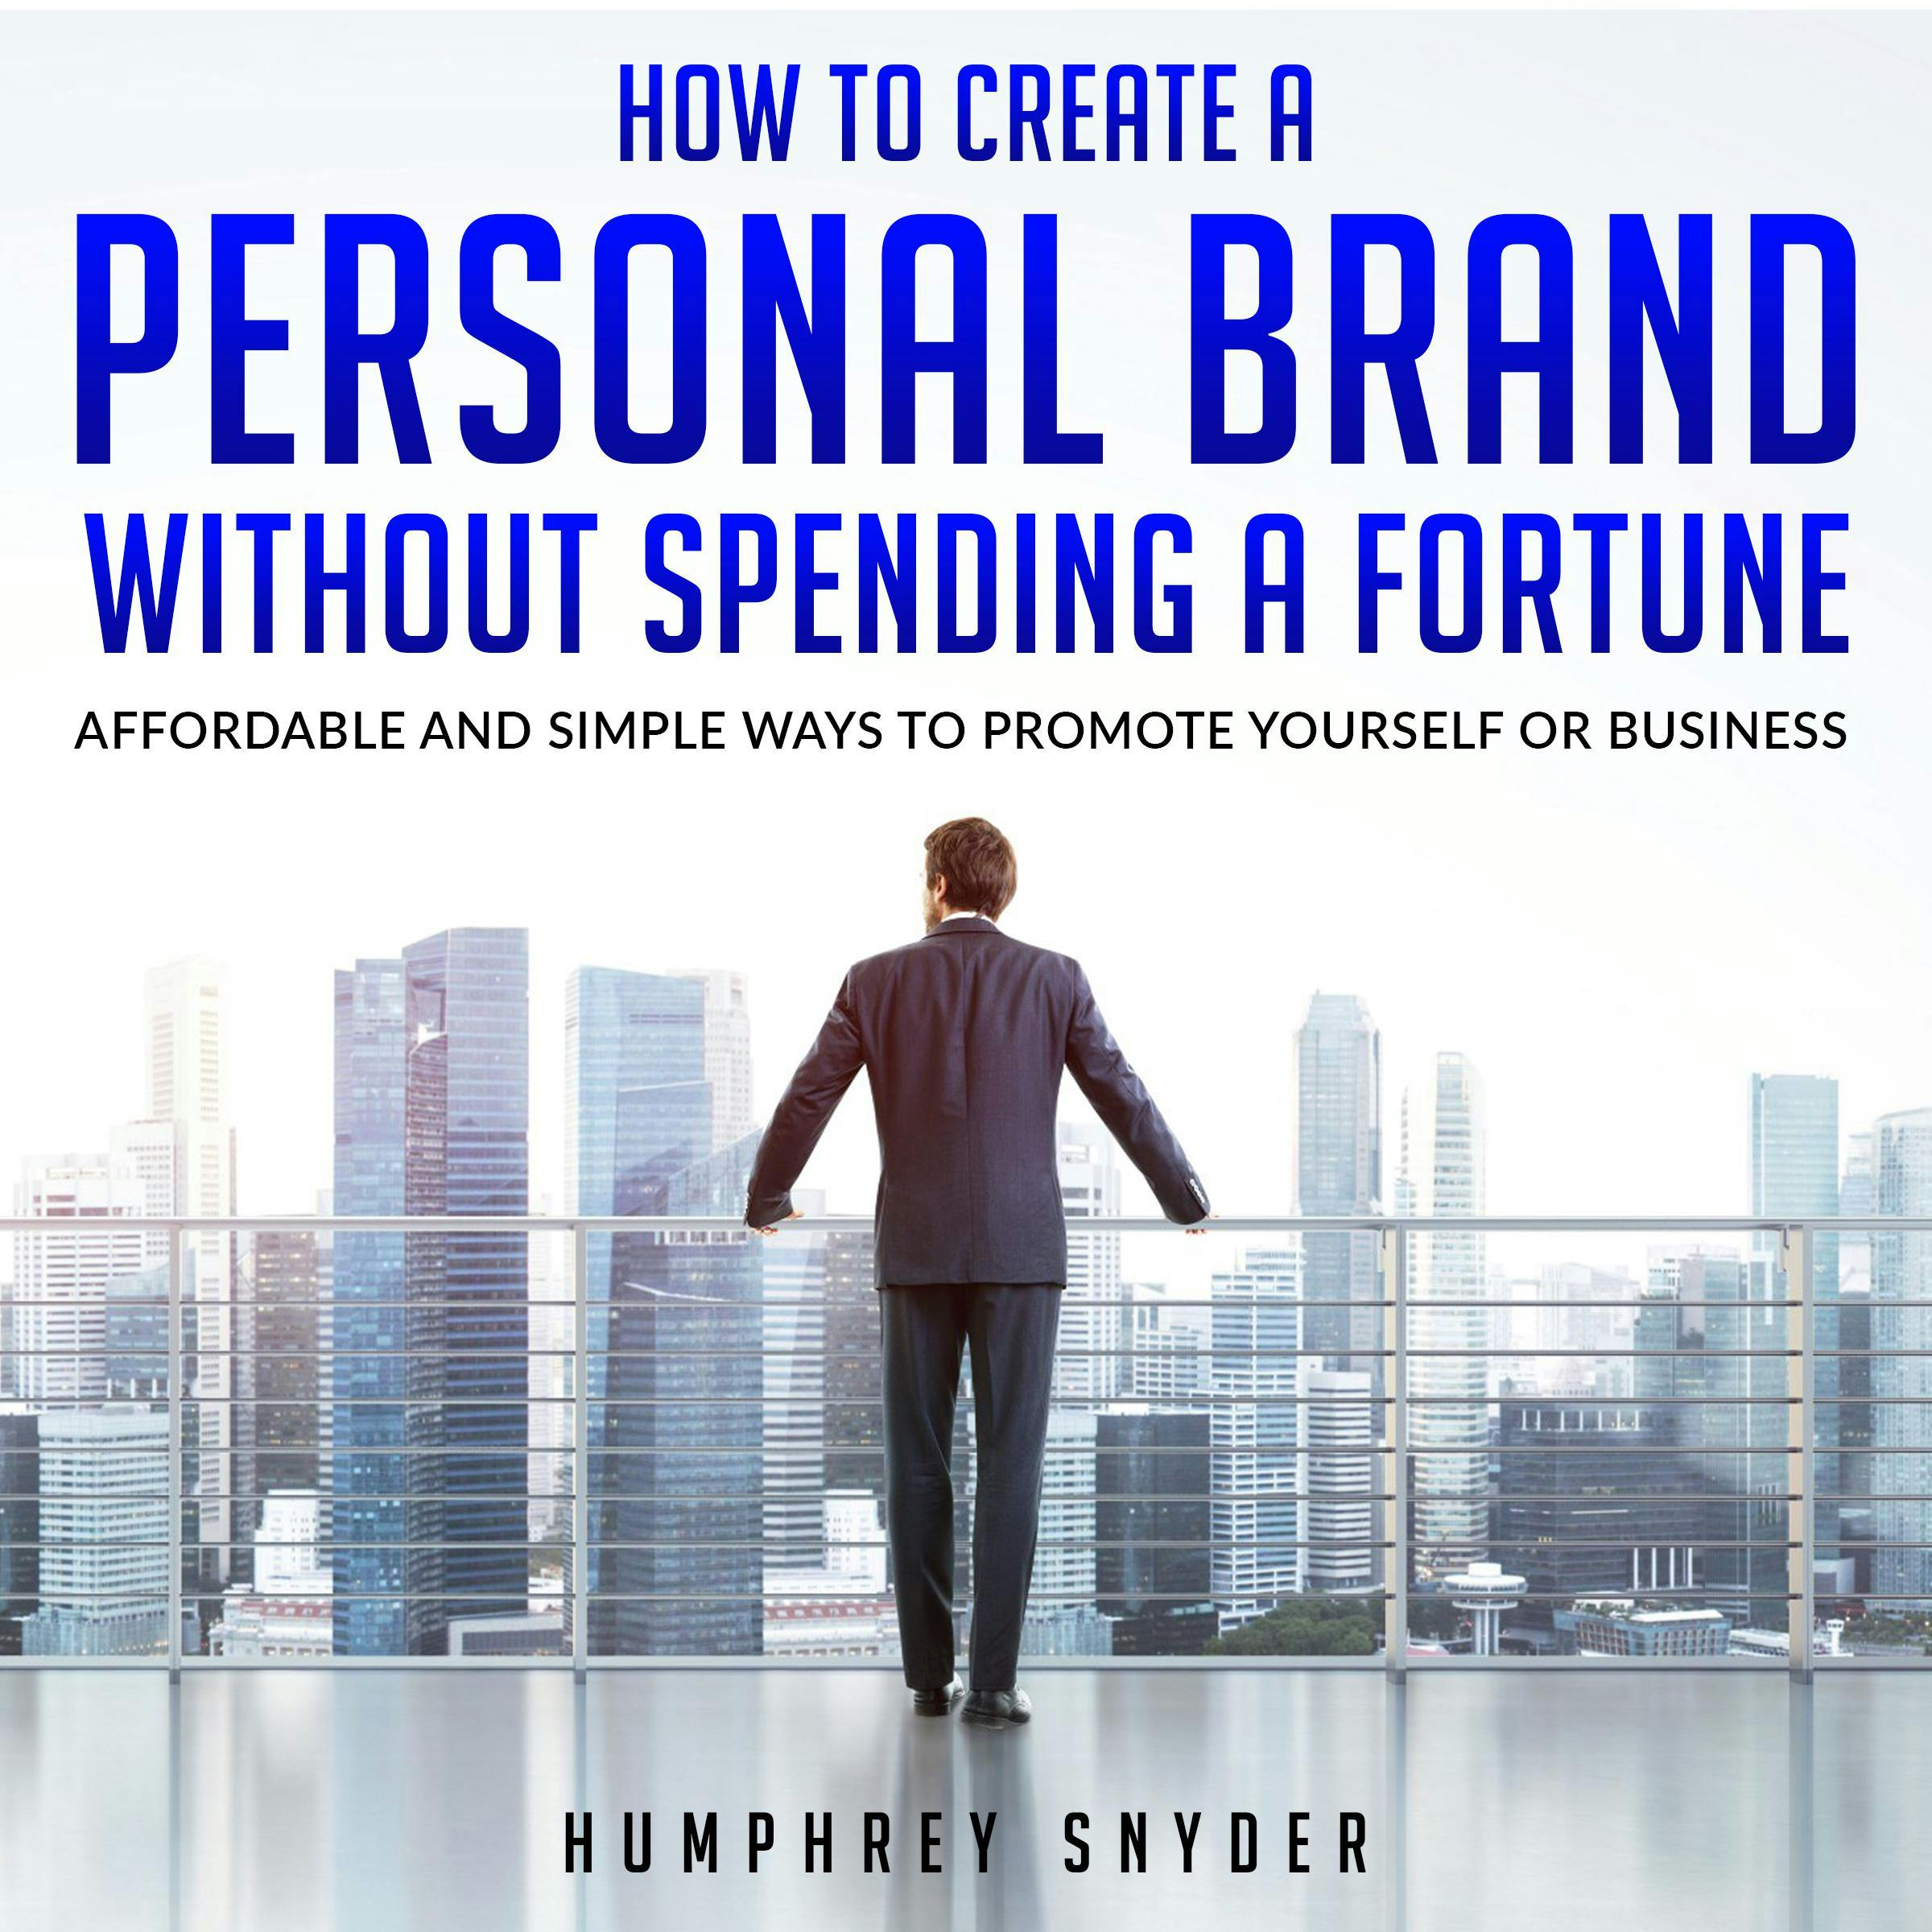 How to Create a Personal Brand without Spending a Fortune: Affordable and Simple Ways to Promote Yourself or Business - Humphrey Snyder